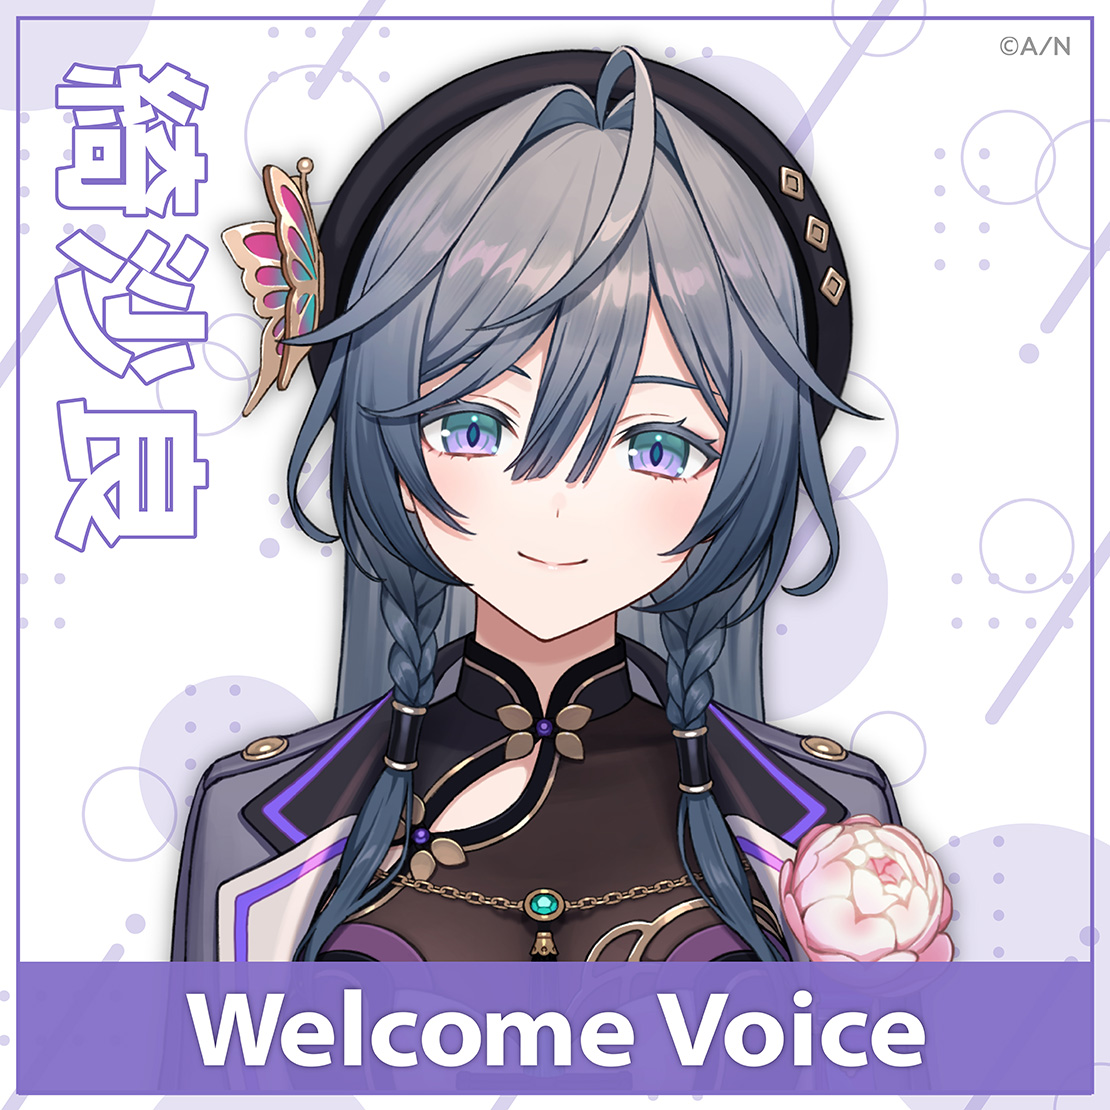 【Welcome Voice】綺沙良